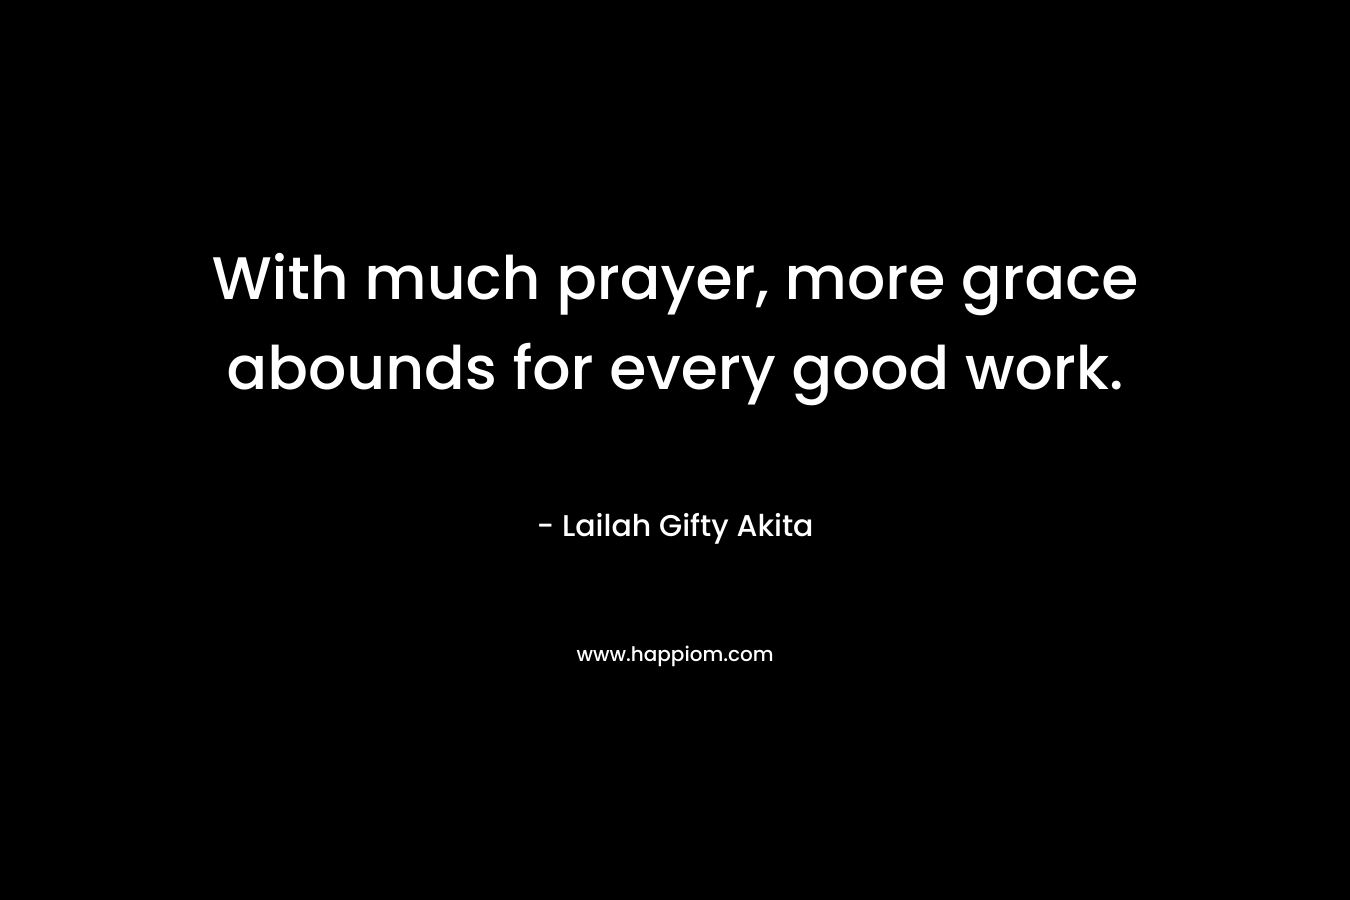 With much prayer, more grace abounds for every good work.